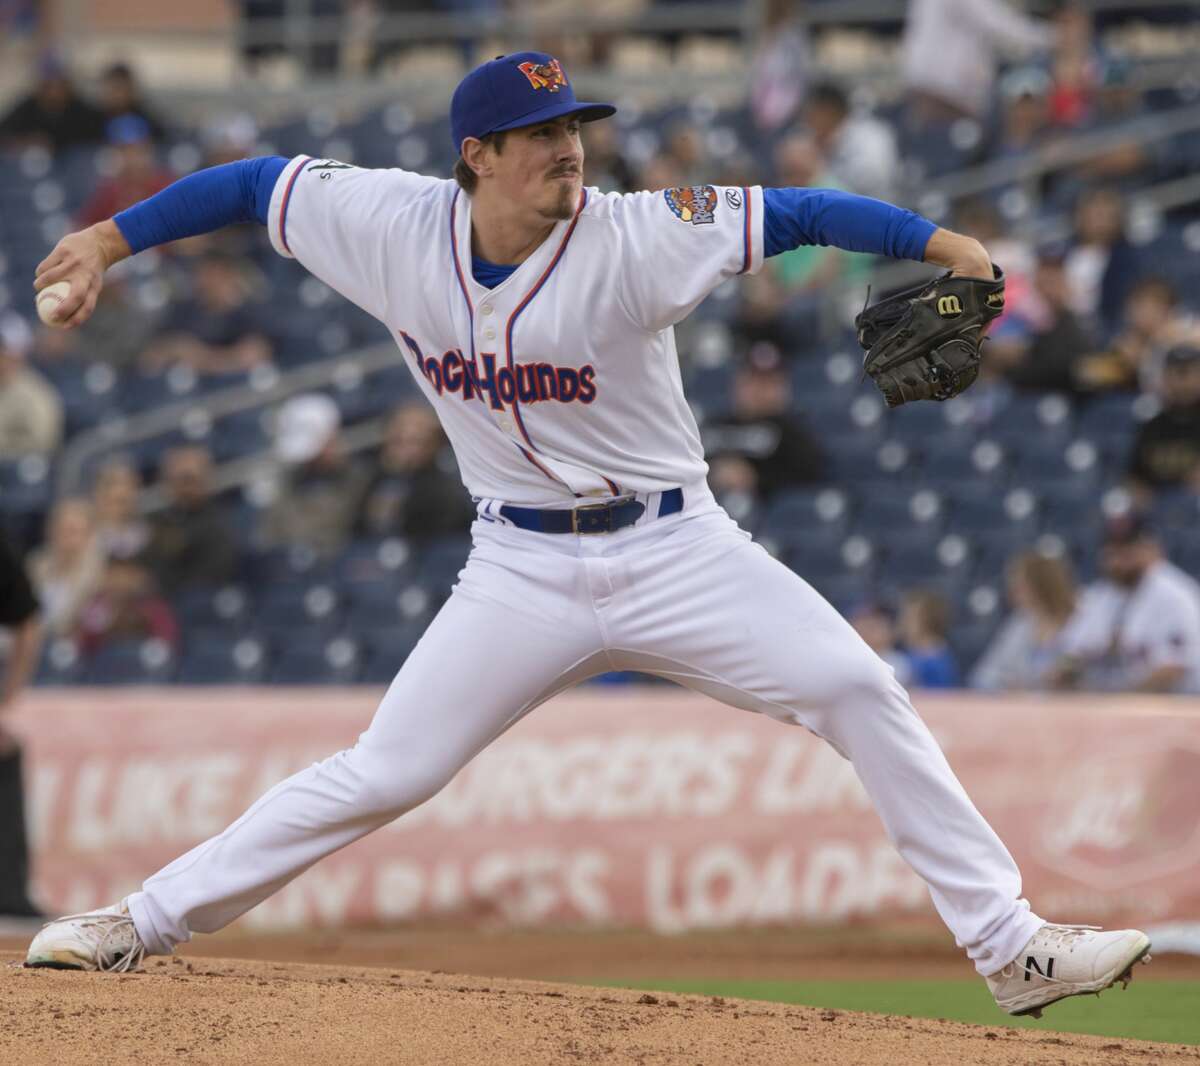 RockHounds' starting pitcher Parker Dunshee delivers a pitch 04/11/19 as the Hounds take on Frisco at the home opener at Security Bank Ballpark. Tim Fischer/Reporter-Telegram